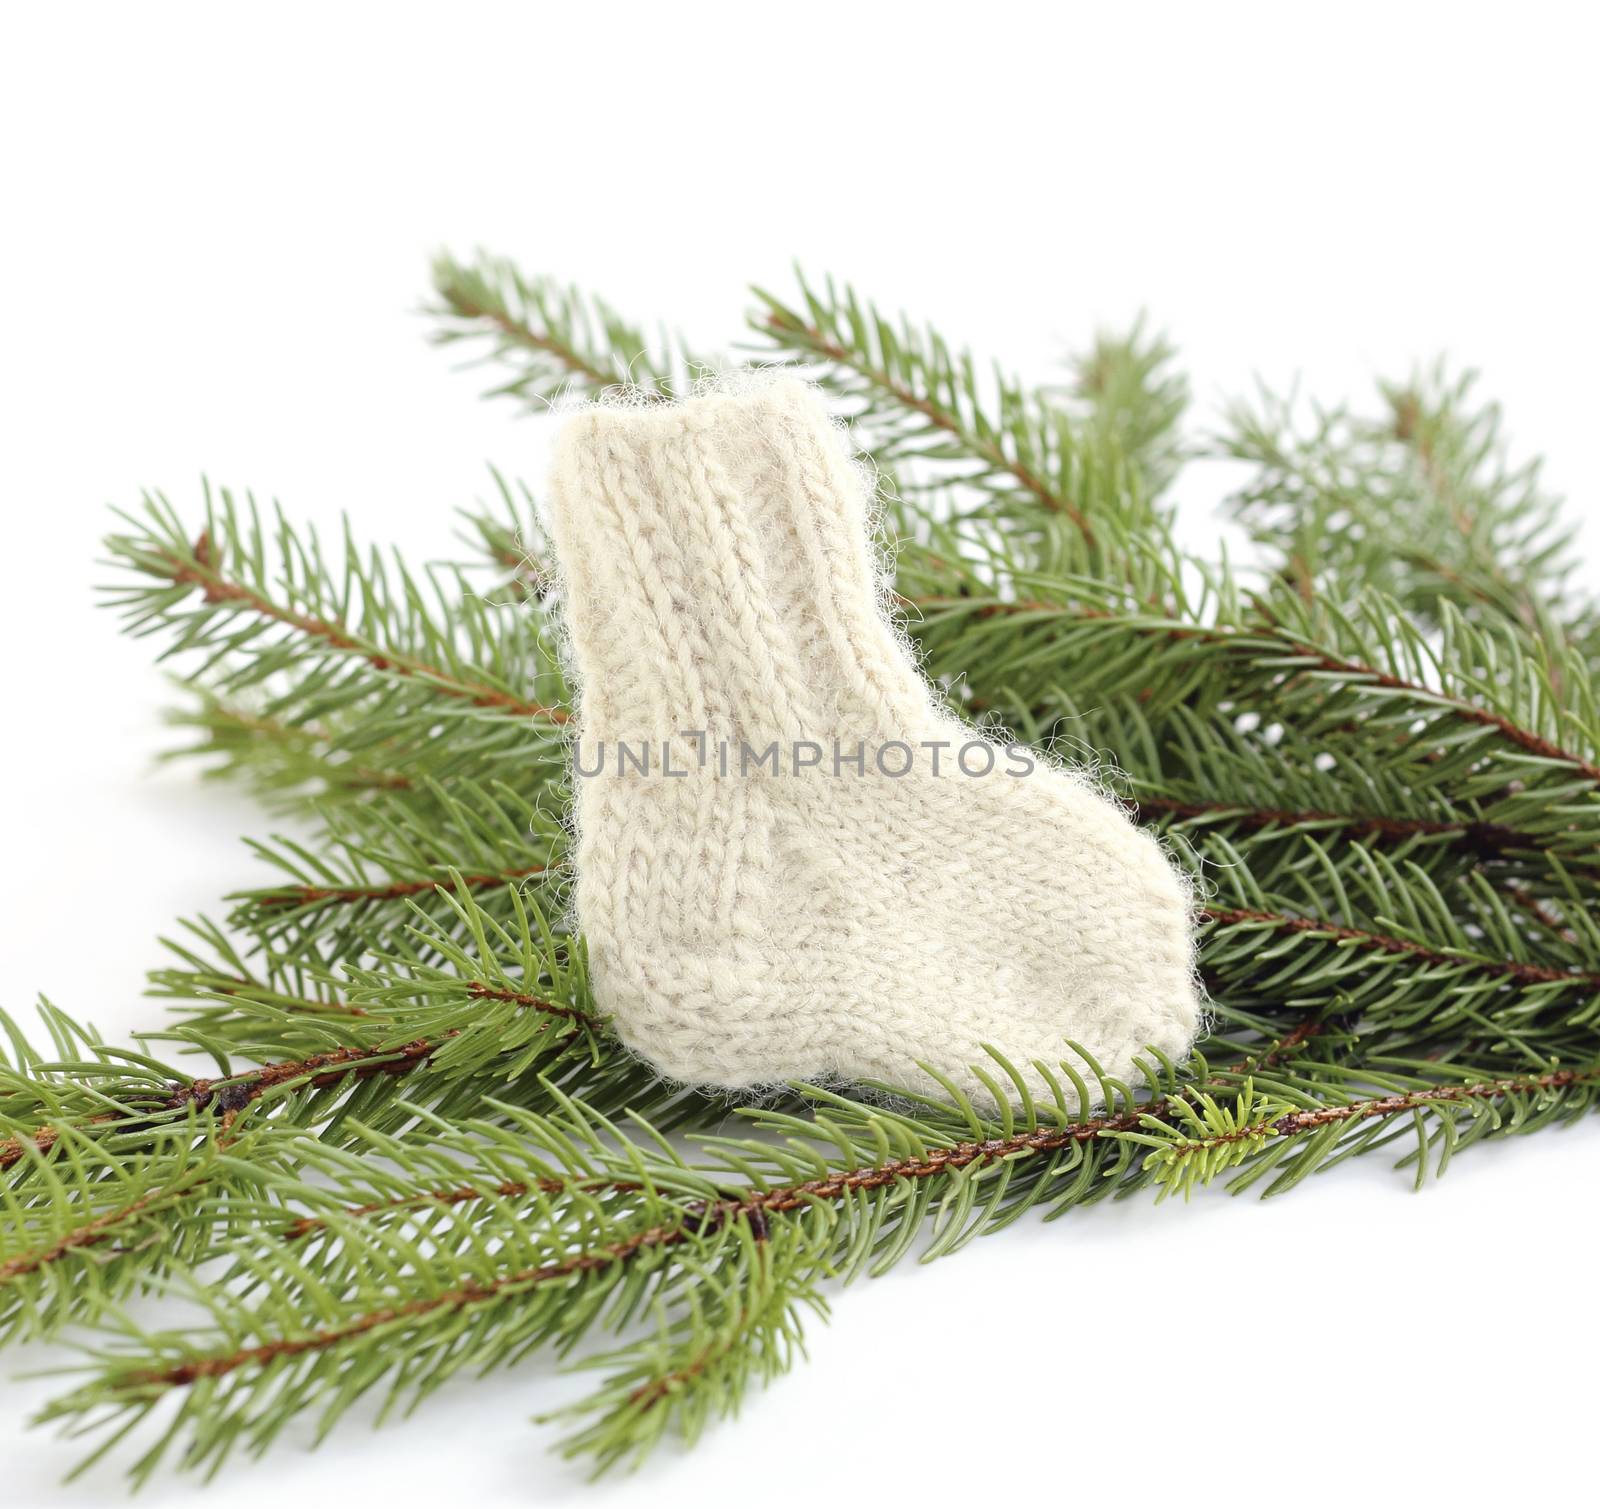 baby knitted woolen sock near spruce branches